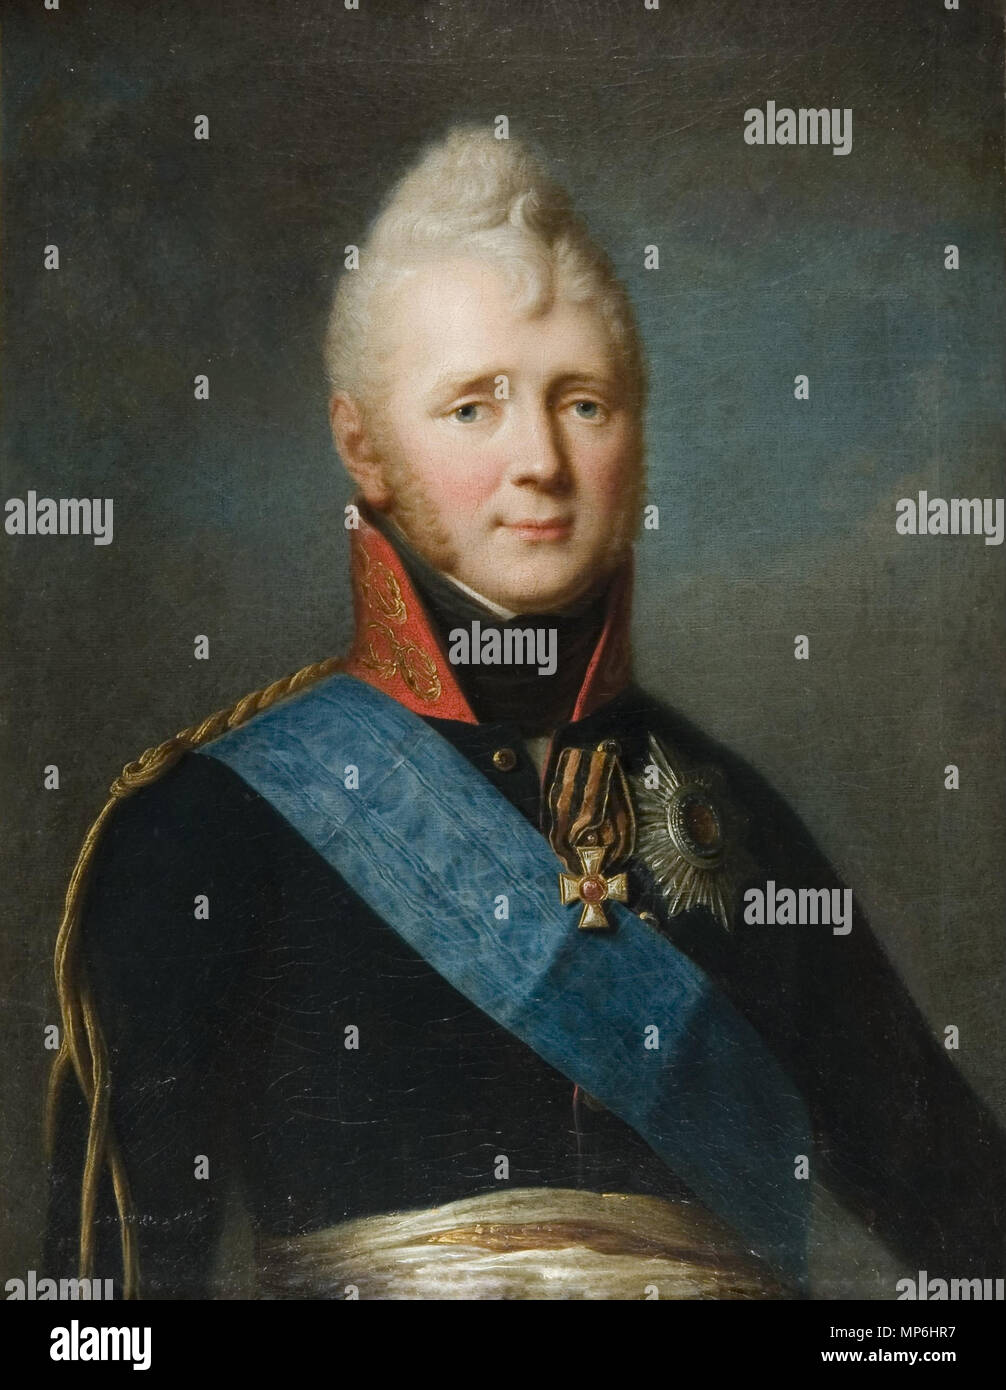 .  English: Portrait of Emperor Alexander I. S.S. Shchukin. 19th century. Ministry of Culture of the Russian Federation, via Google Cultural Institute . 19th century.   1019 Portrait of Emperor Alexander I - Google Cultural Institute Stock Photo